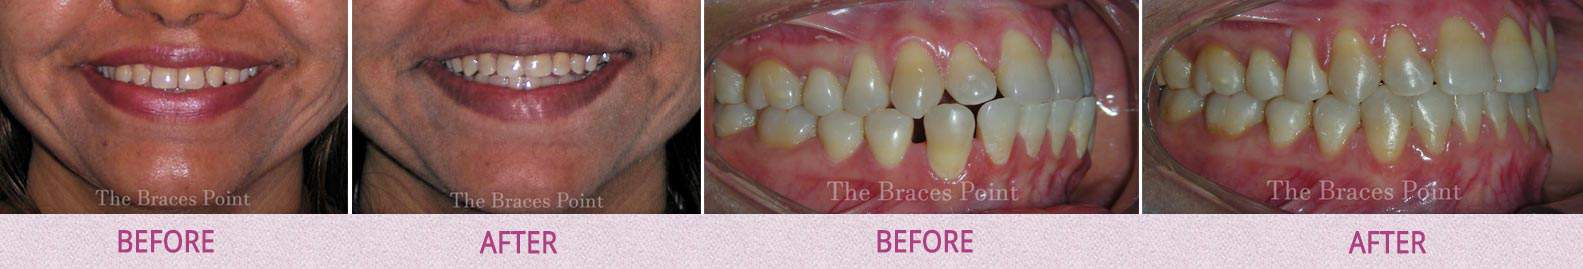 Before And After Orthodontics Thebracespoint 08